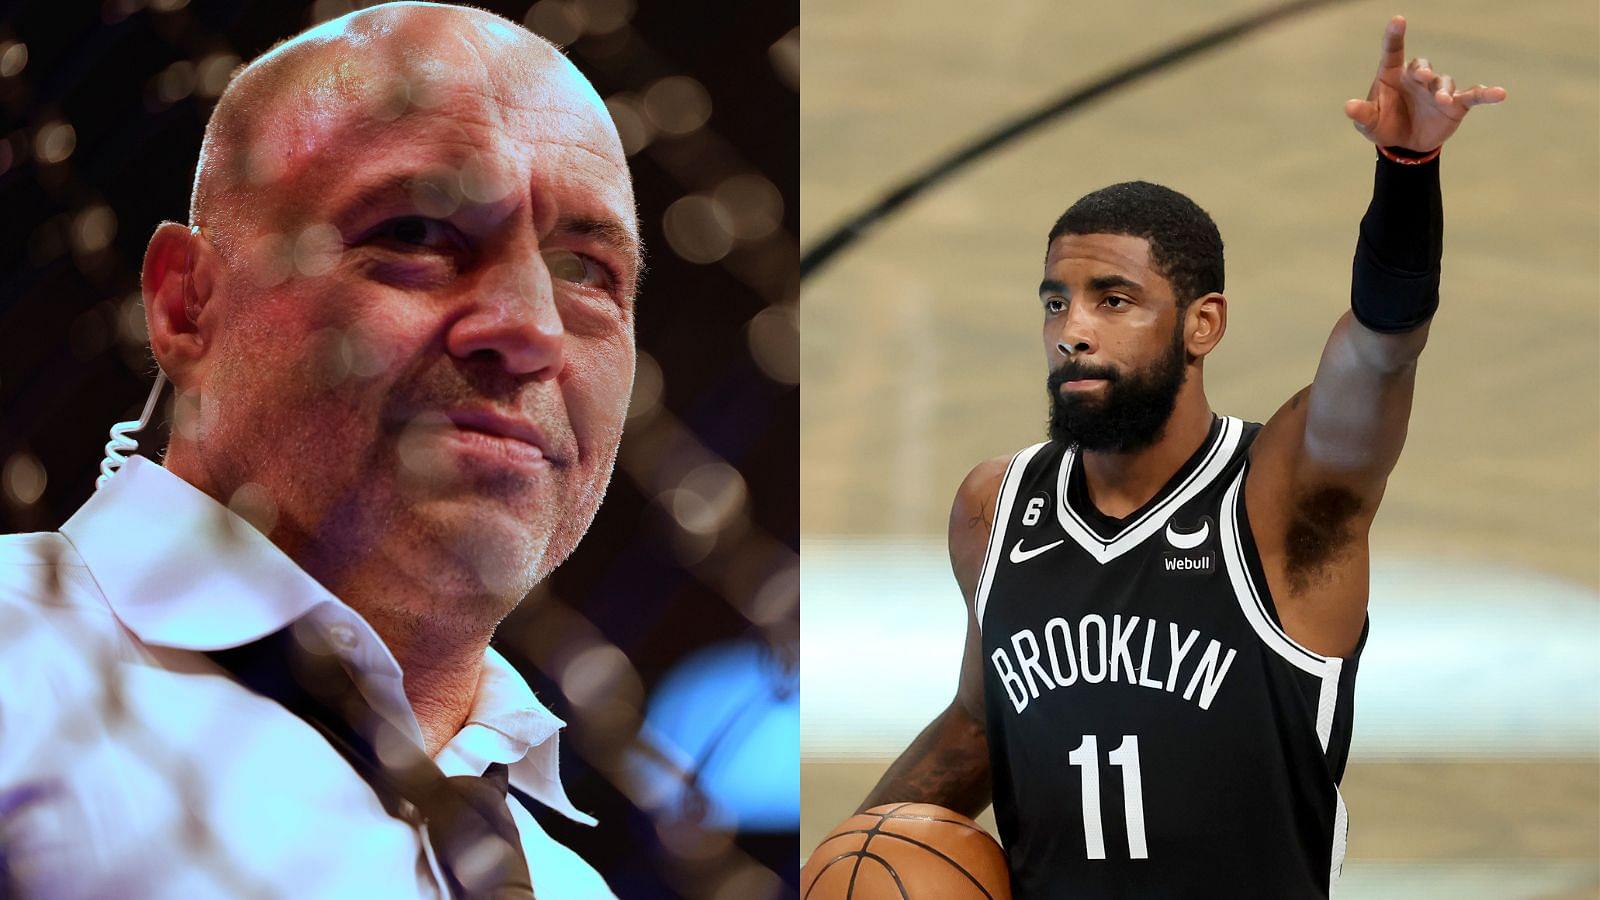 “Kyrie Irving Just Posted a Link to What Amazon is Selling? Fu**ing Wild!”: Joe Rogan Calls Out Hypocrisy in 6ft 2' NBA Star’s Anti-Semitic Fiasco